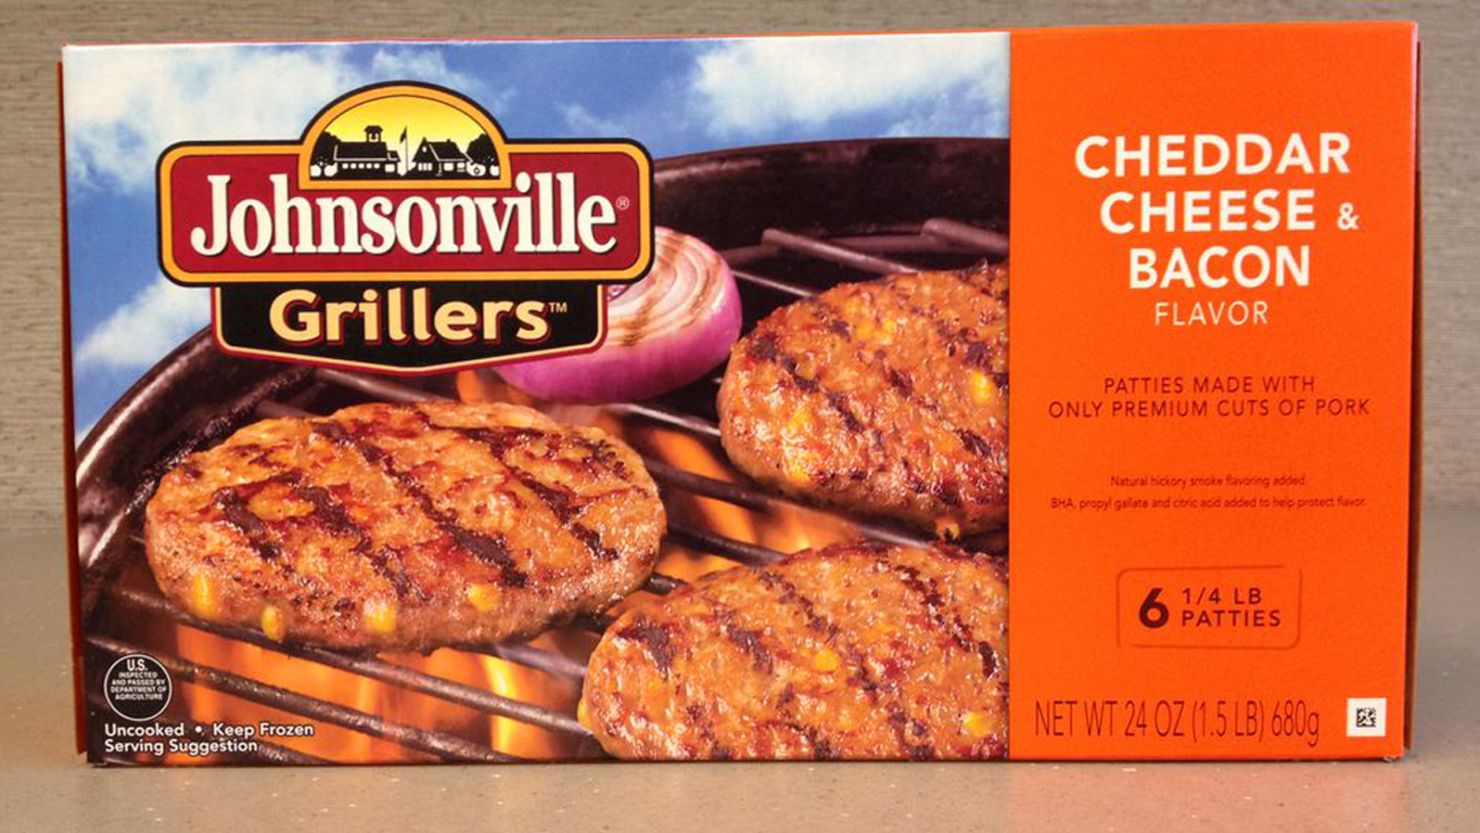 Johnsonville Grillers, cheddar cheese and bacon flavor have been recalled consumers have reported small pieces of metal in the meat. 